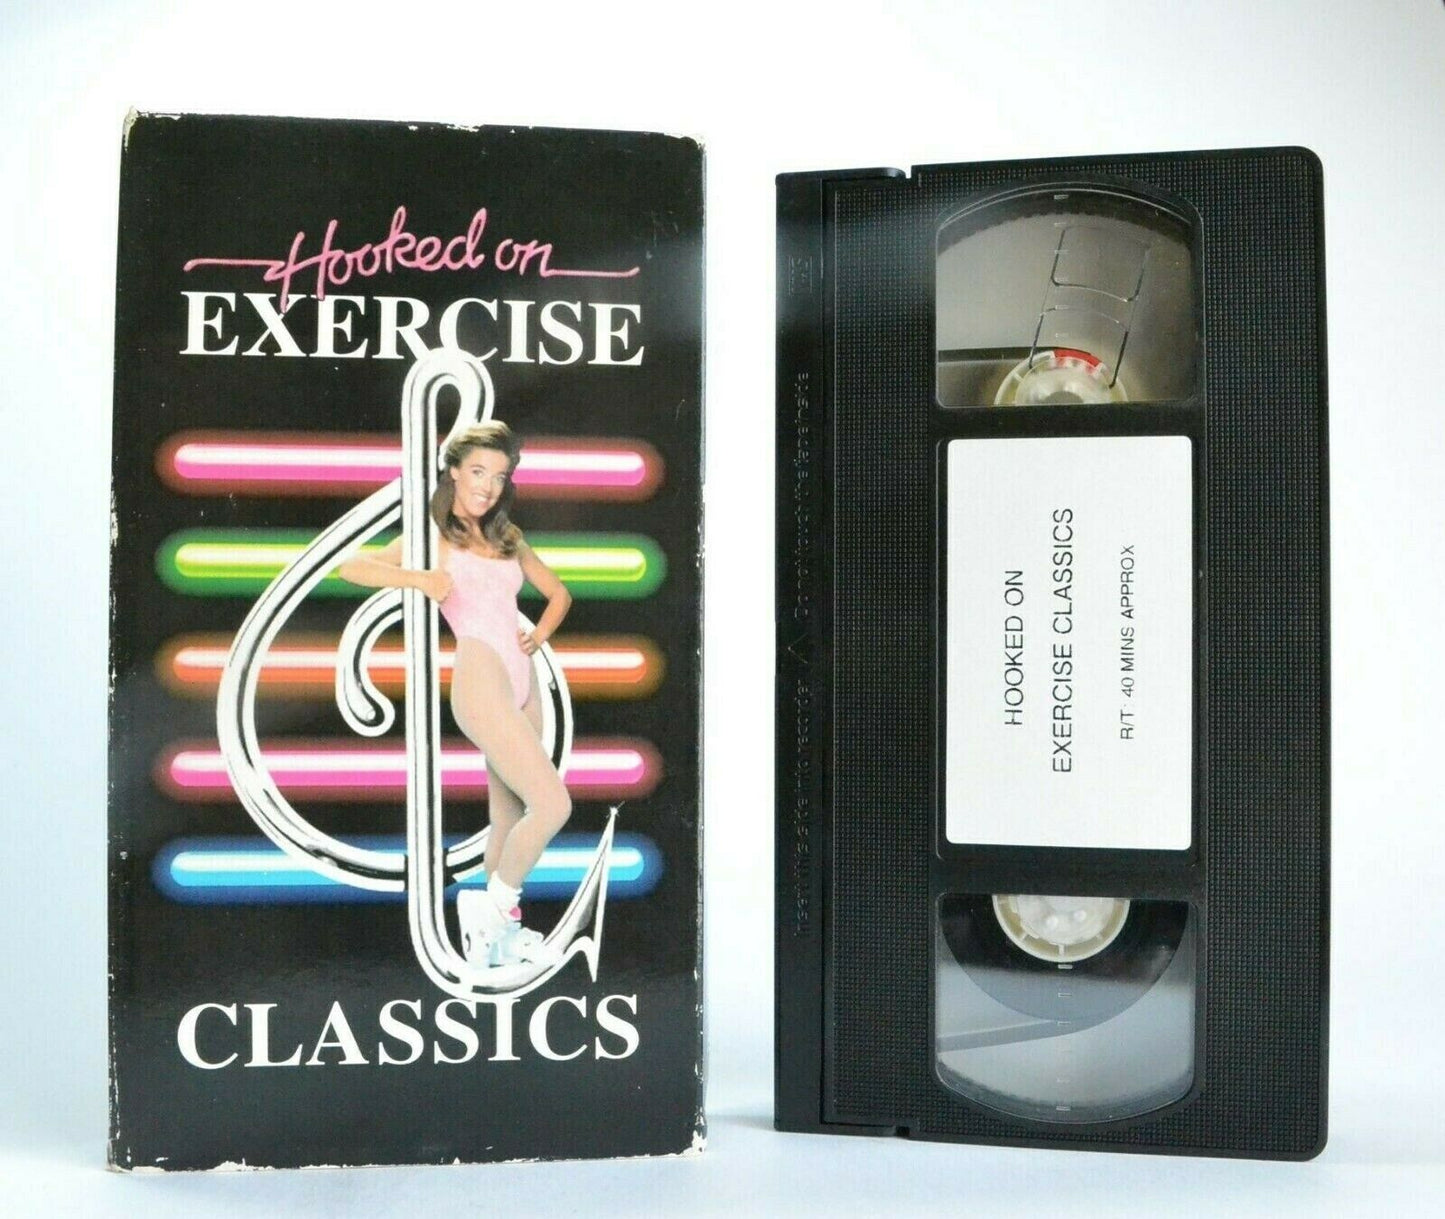 Hooked On Exercise Classics: Louise Clark - Body Workout - Exercises - Fitness - Pal VHS-